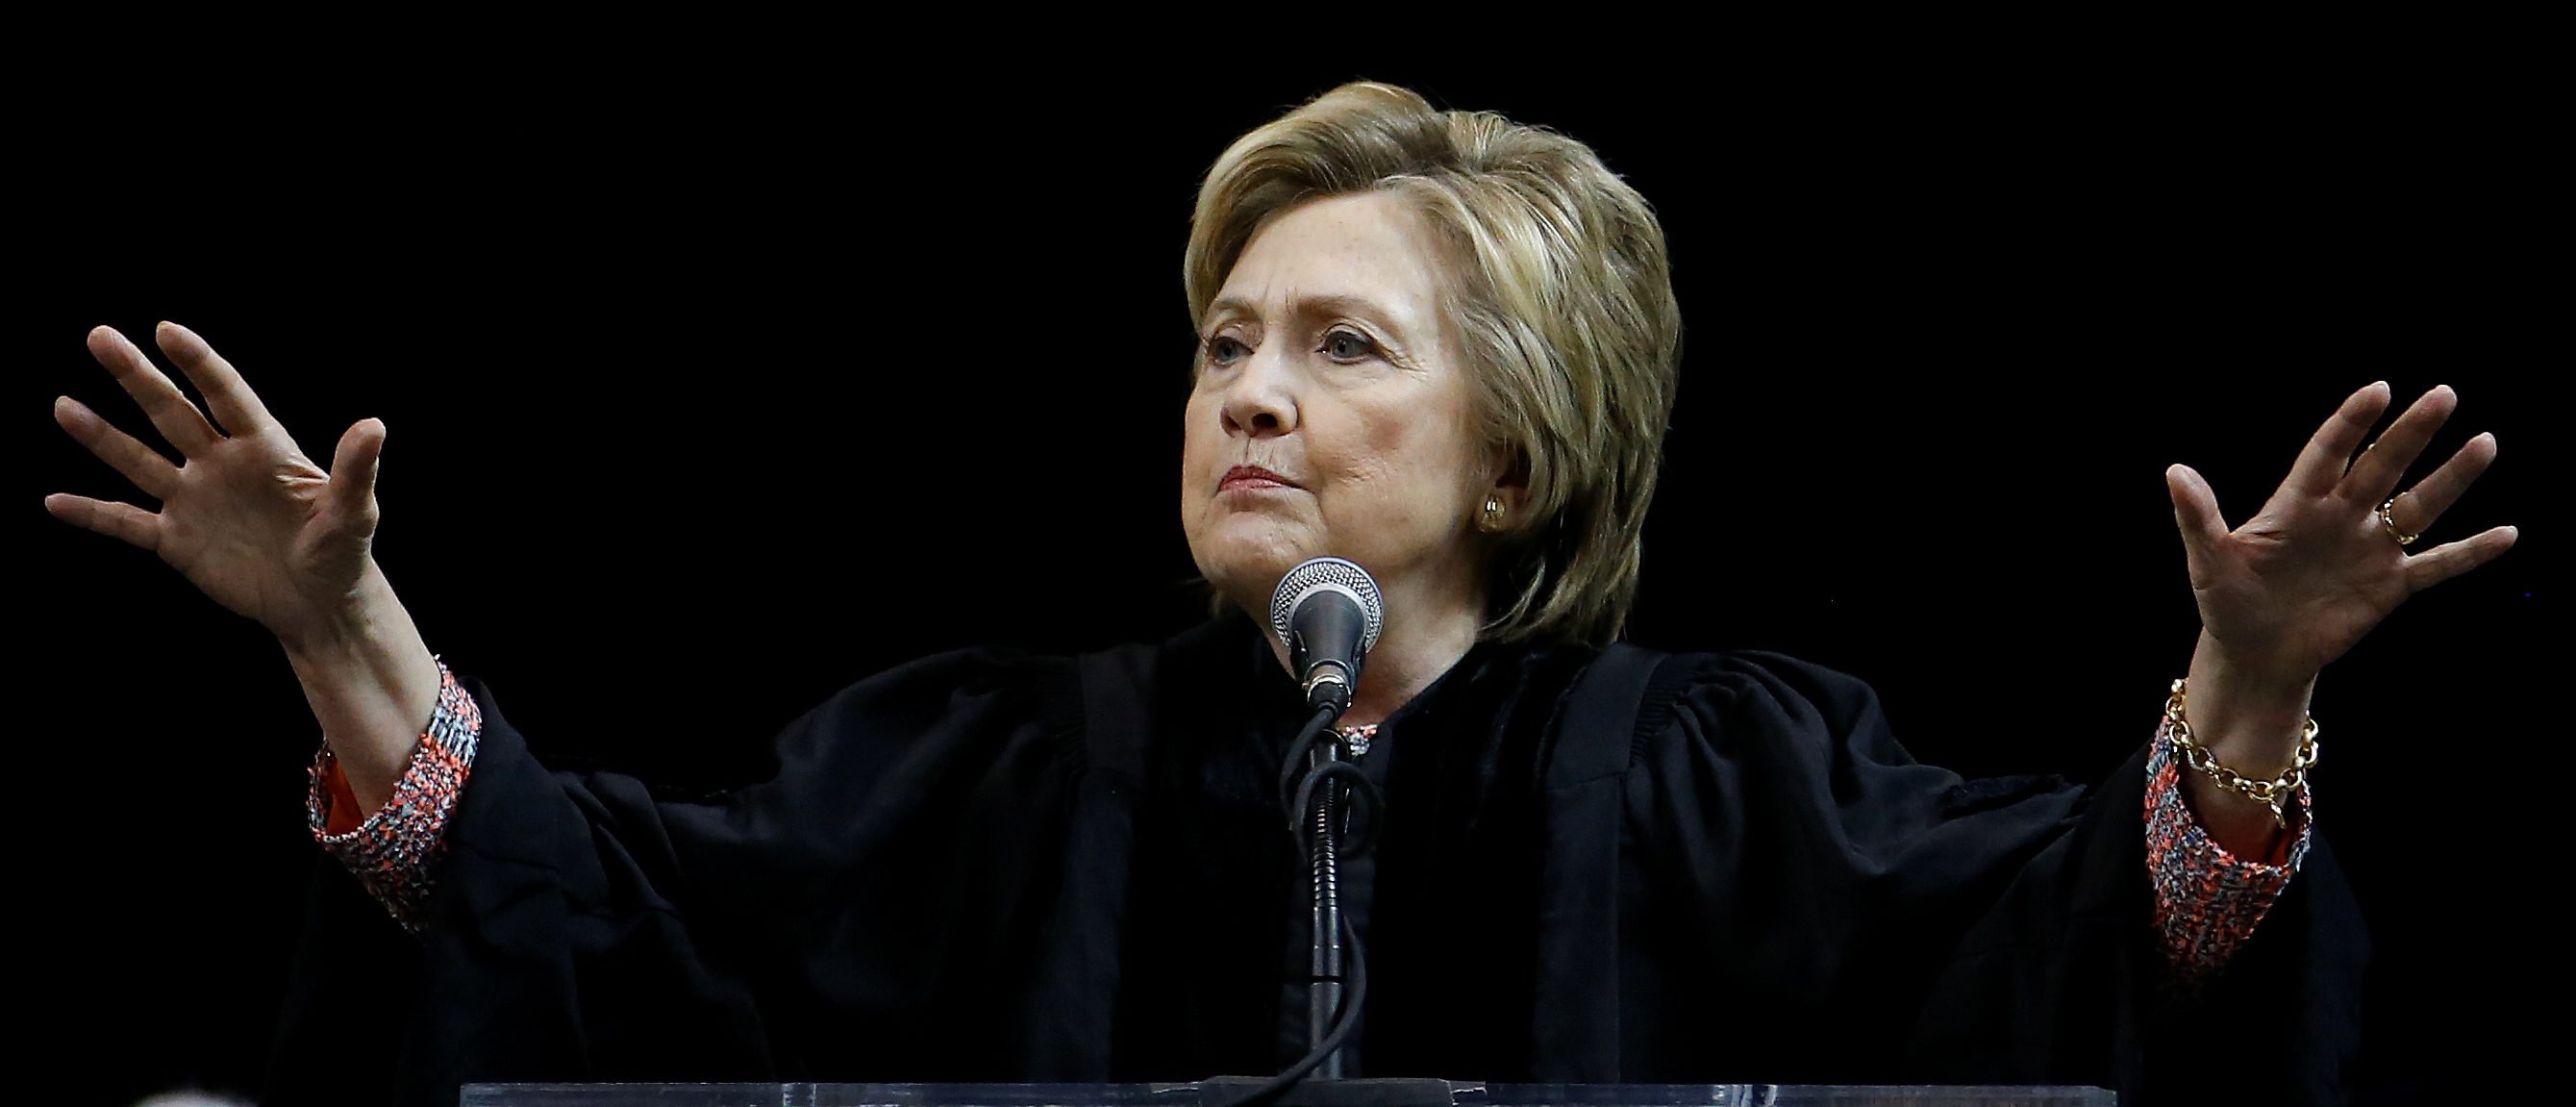 Former Secretary of State Hillary Clinton speaks on stage during a commencement for Medgar Evers College in the Brooklyn borough of New York City, New York, U.S. June 8, 2017.   REUTERS/Carlo Allegri - RTX39OMC